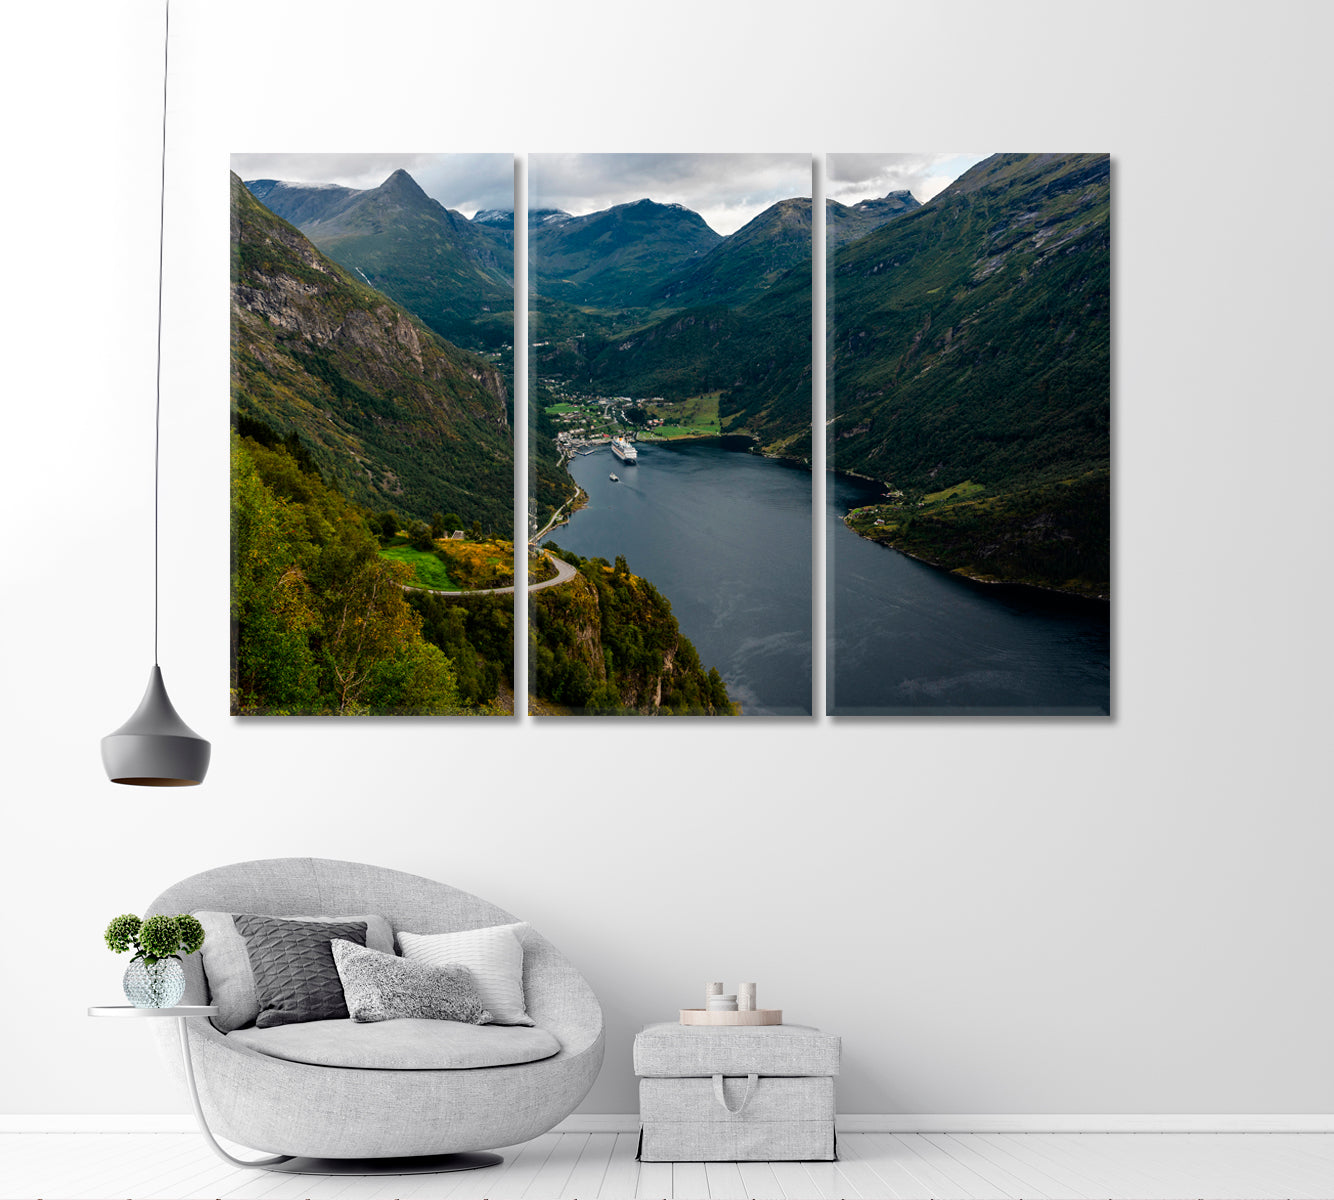 Cruise Liner In Geiranger Fjord Norway Canvas Print-Canvas Print-CetArt-3 Panels-36x24 inches-CetArt